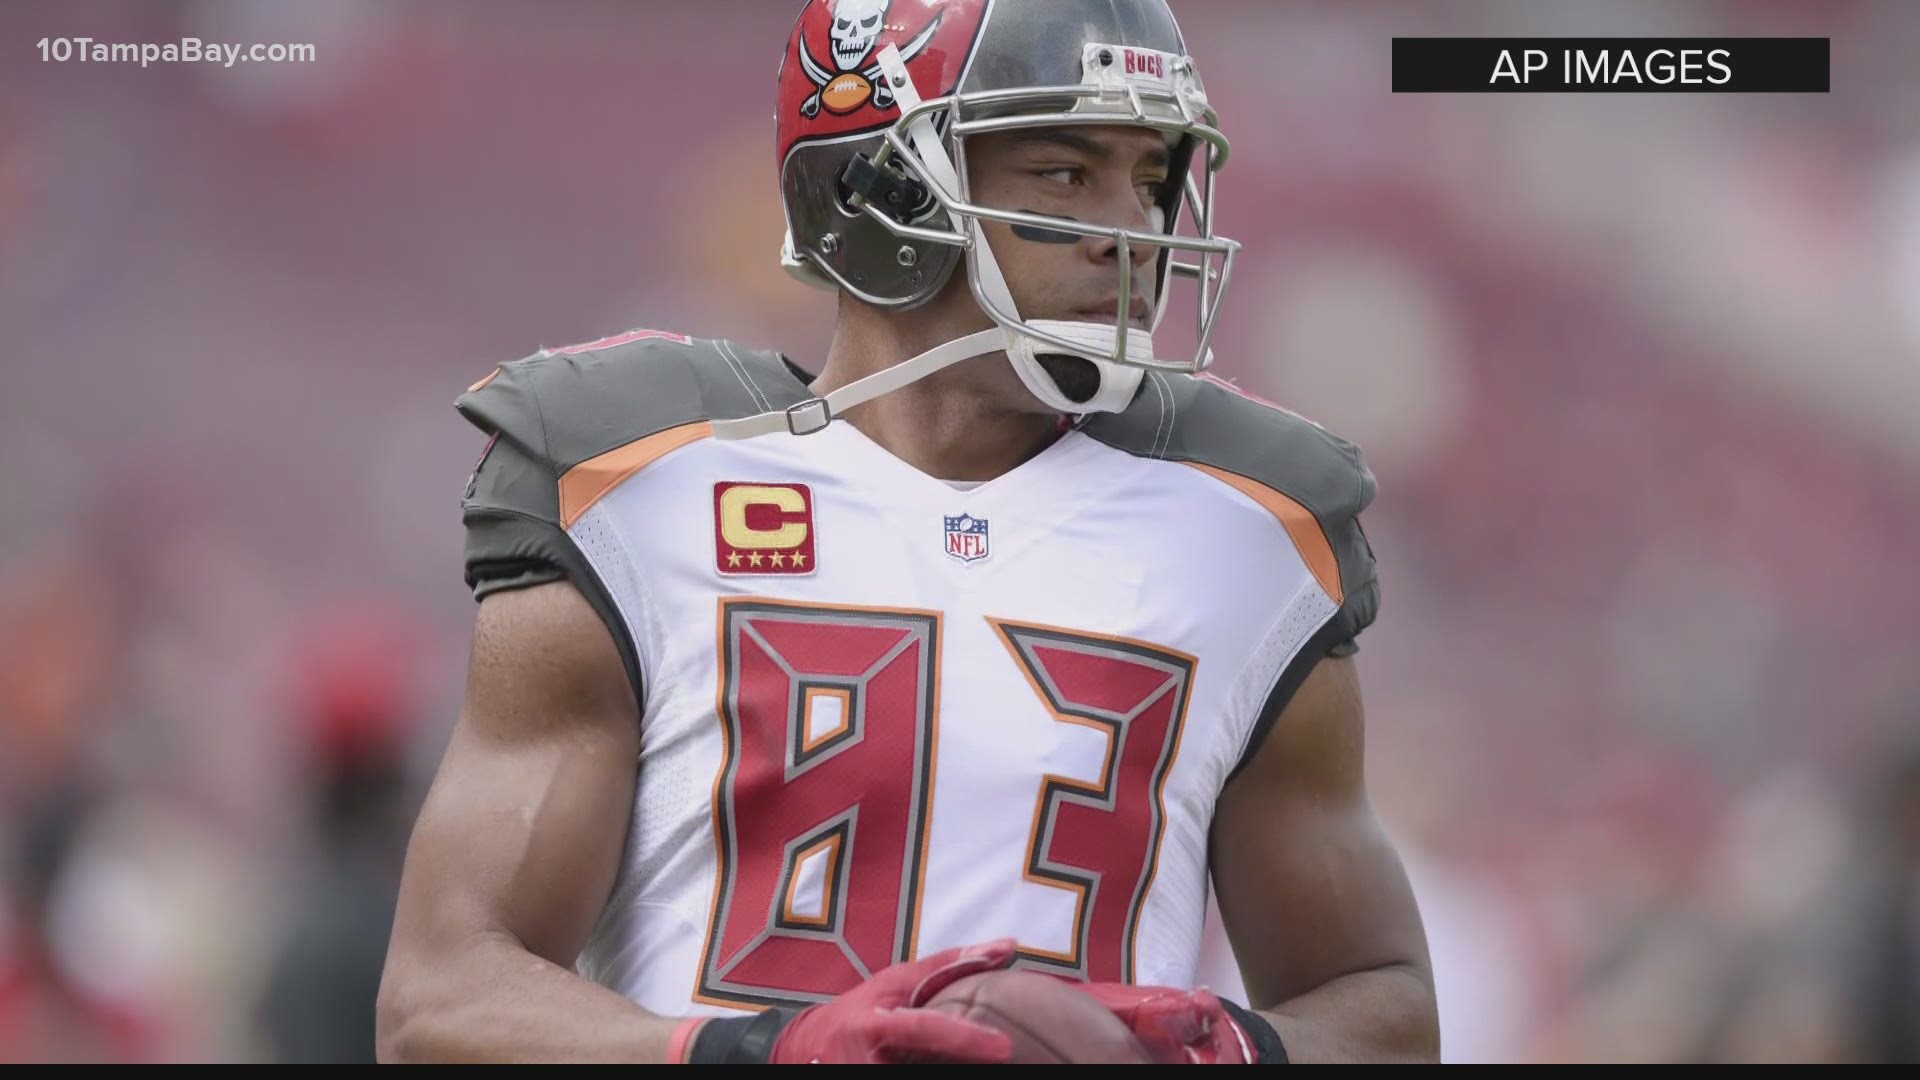 The former team captain and 4th leading receiver in Tampa Bay Buccaneers history was 38 years old.